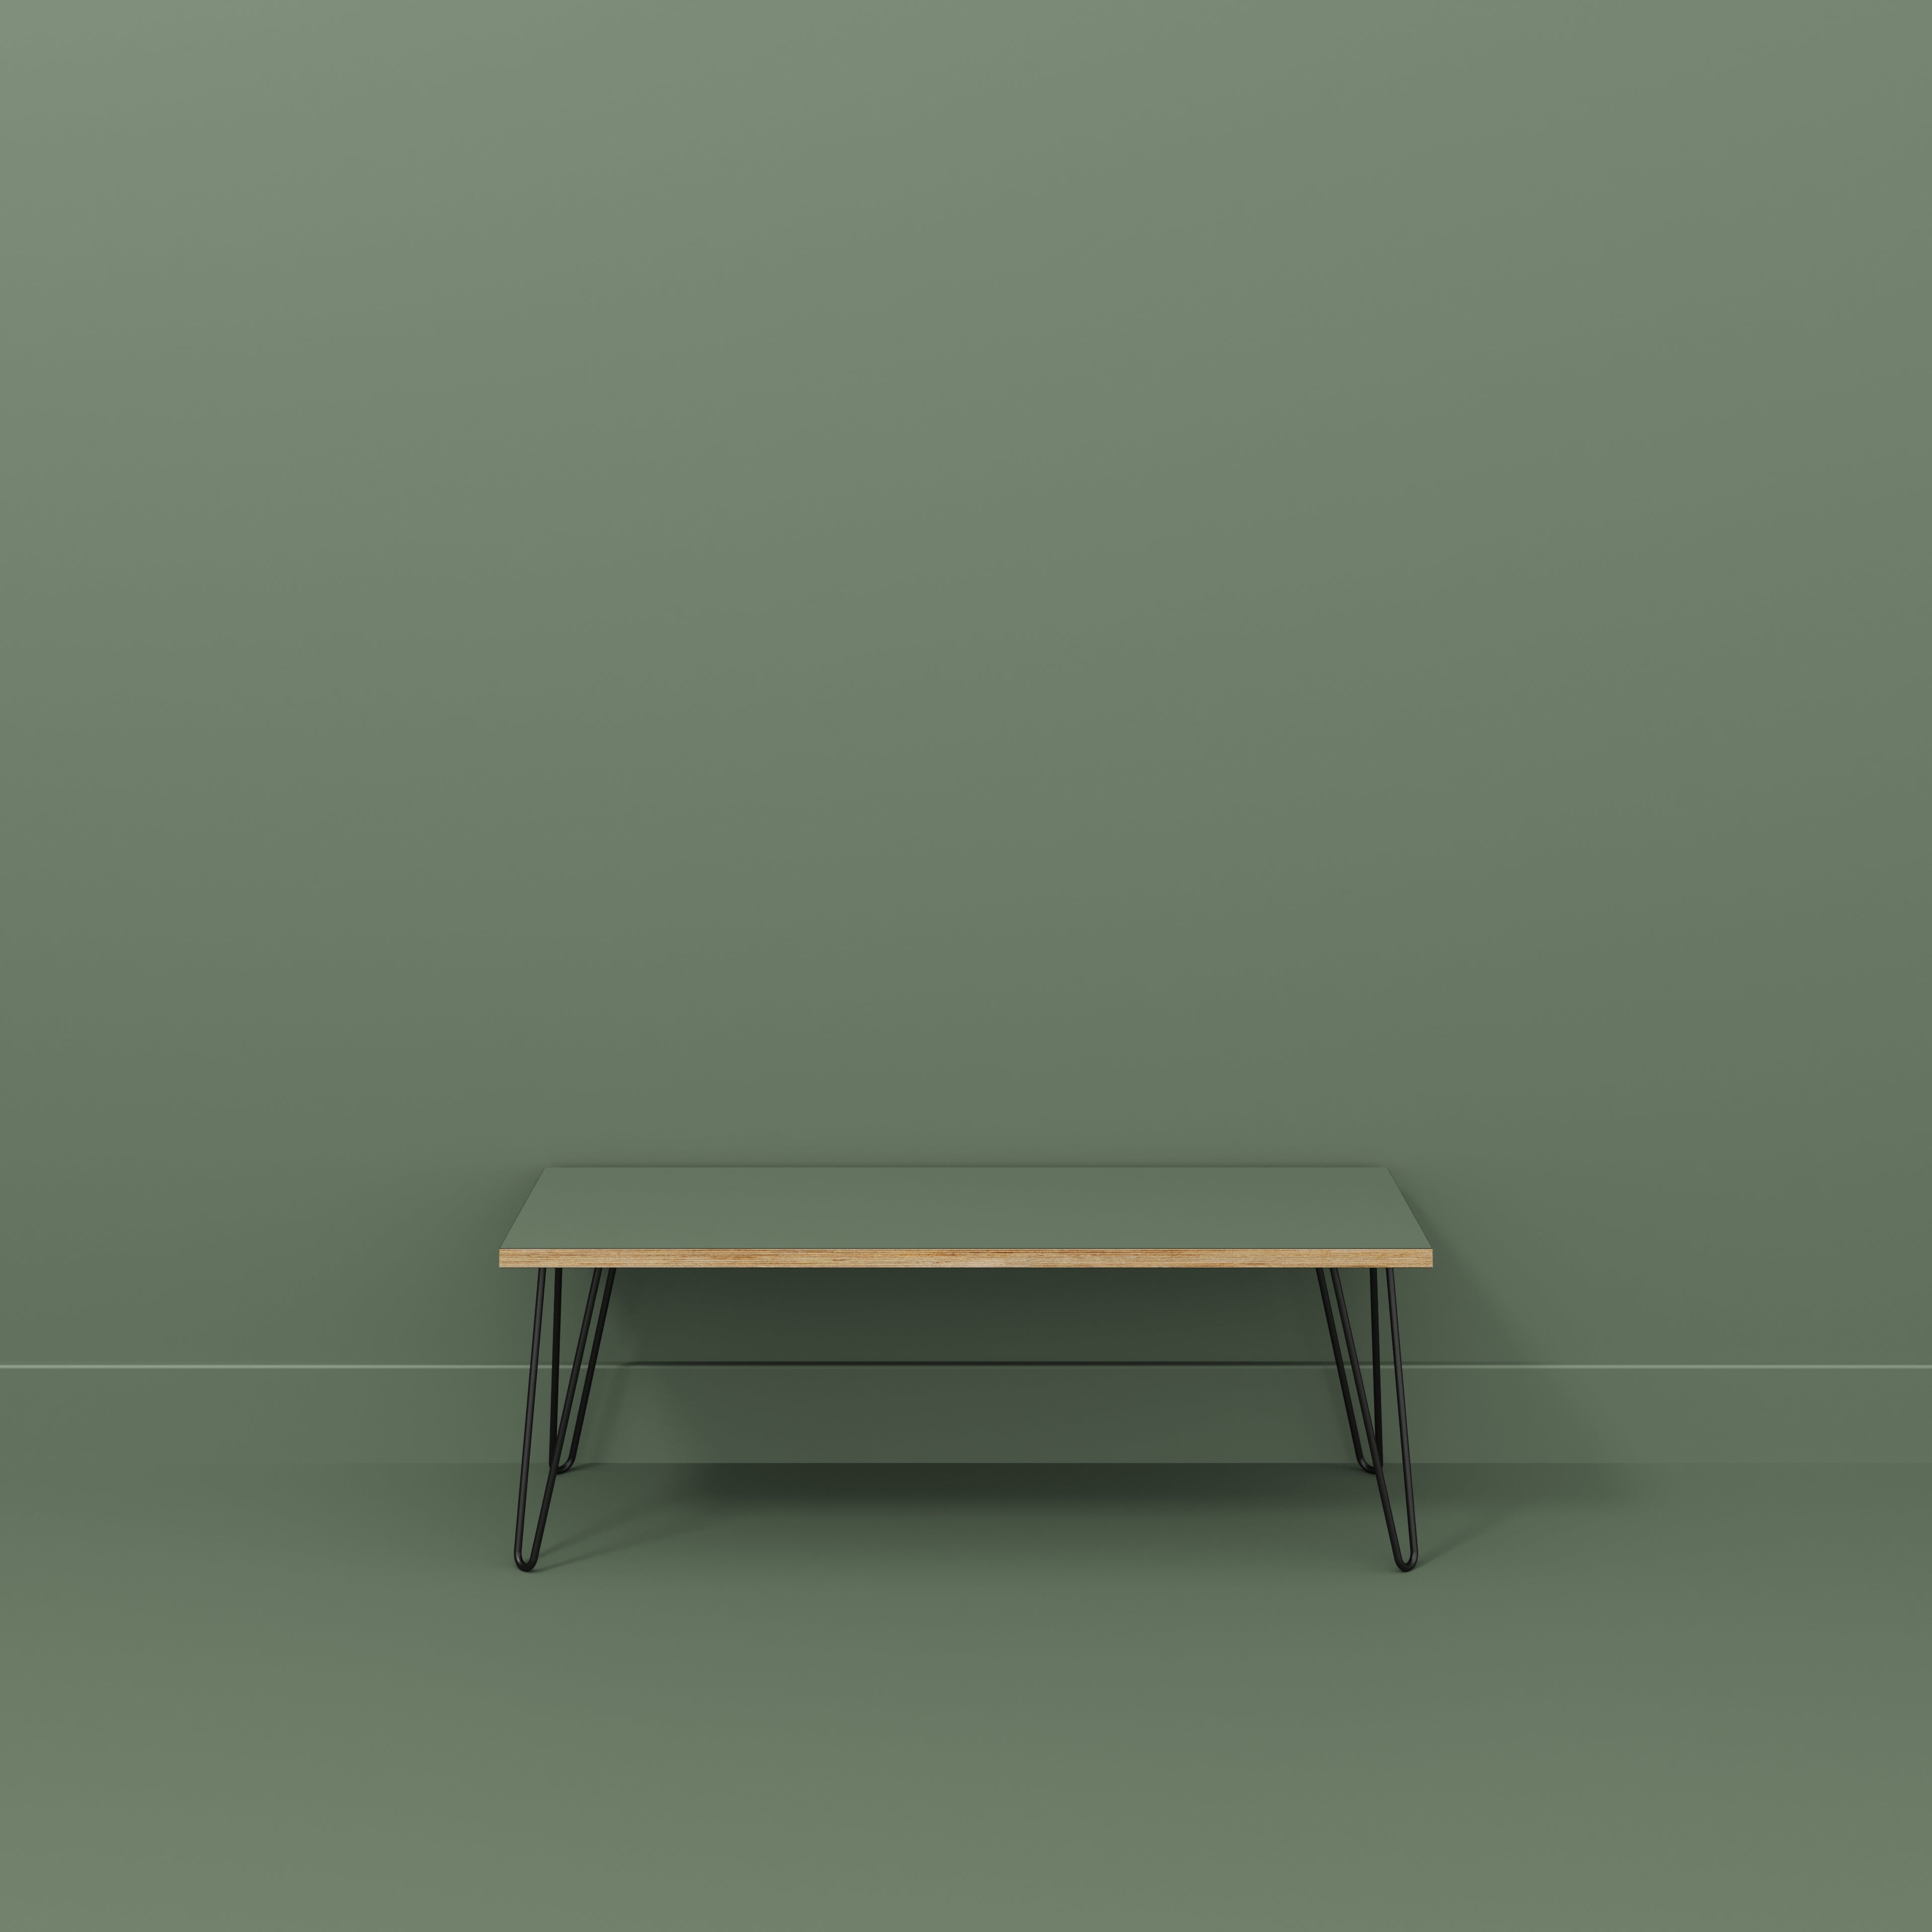 Bench Seat with Black Hairpin Legs - Formica Green Slate - 1200(w) x 400(d)